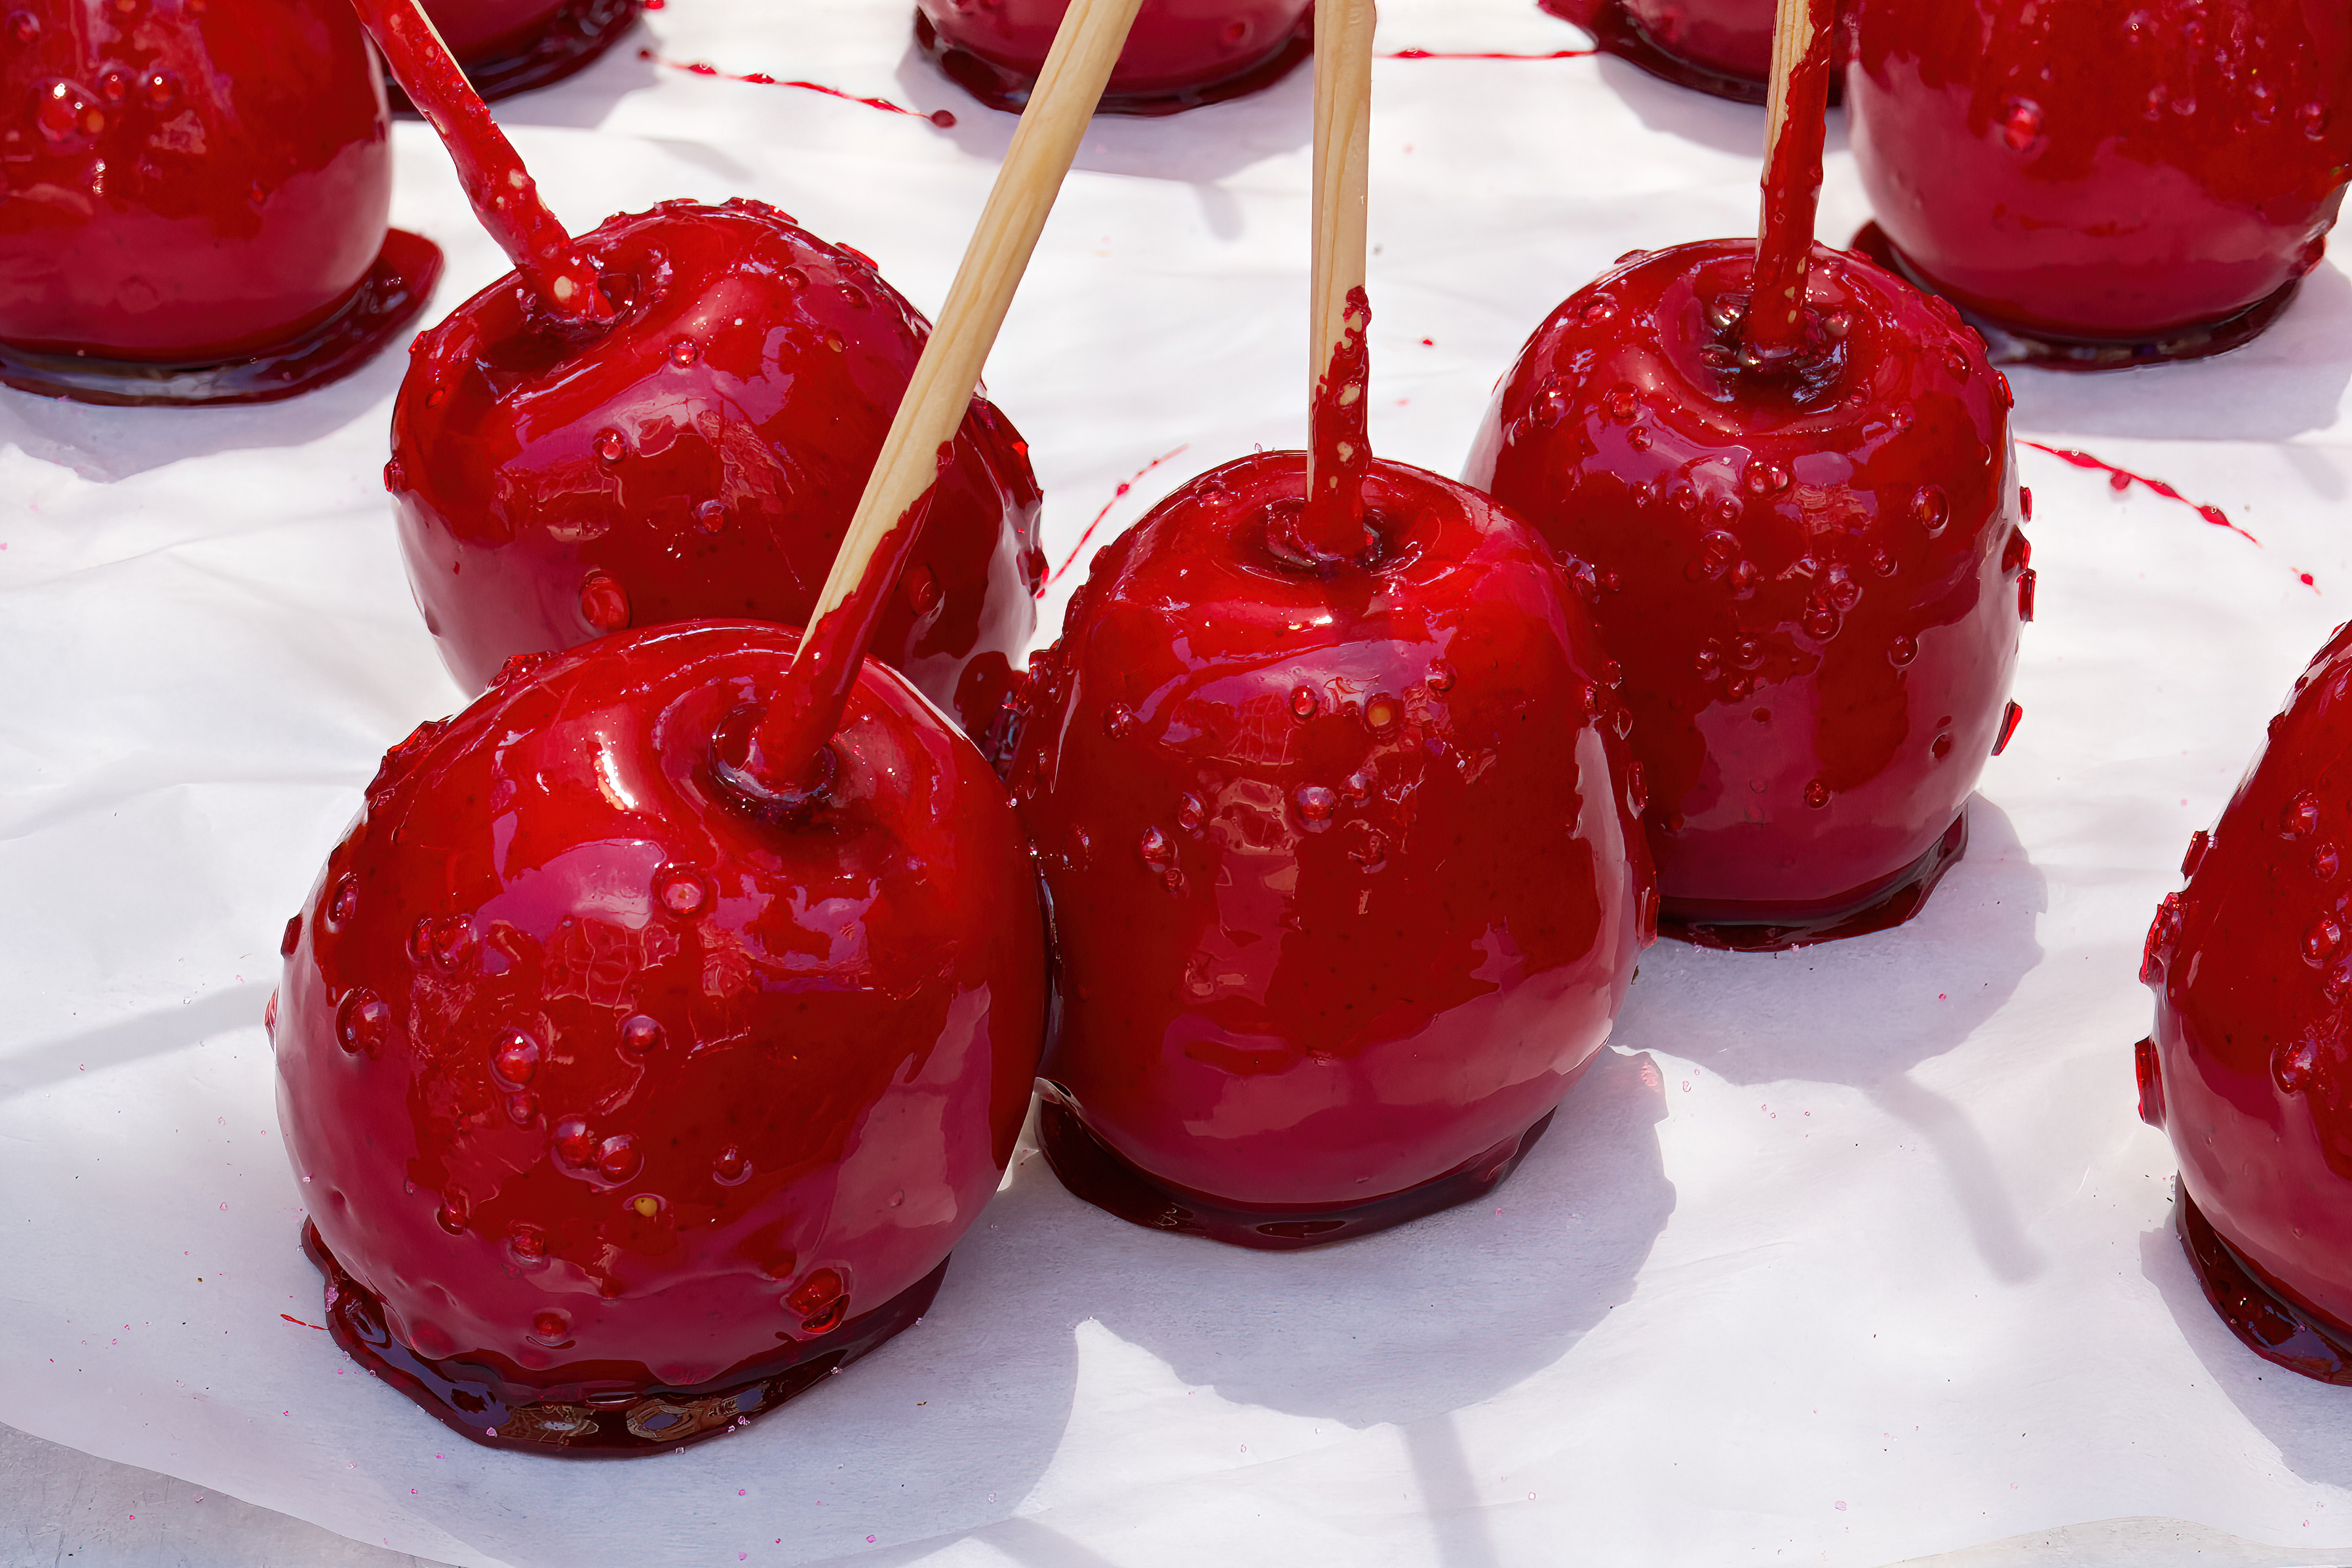 Candied apples